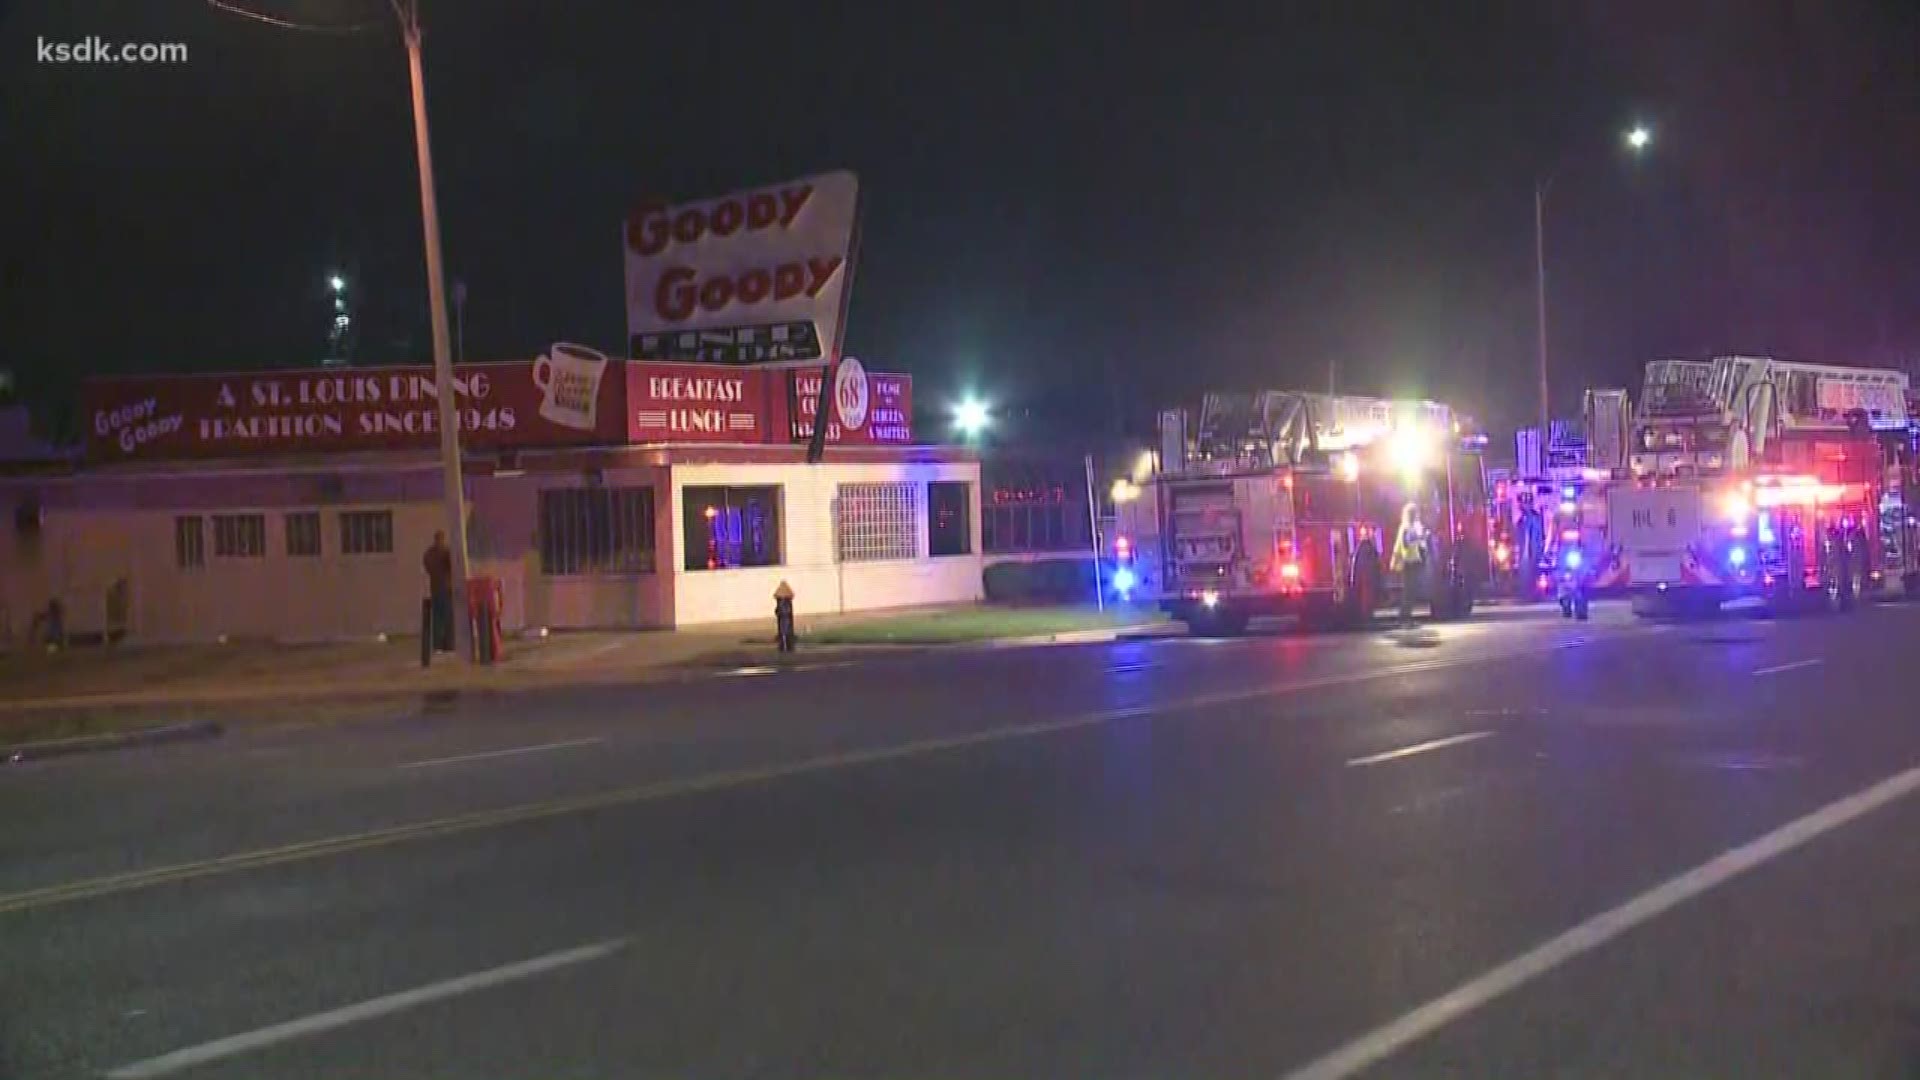 Firefighters were called to Goody Goody Diner Monday night for a report of a fire.